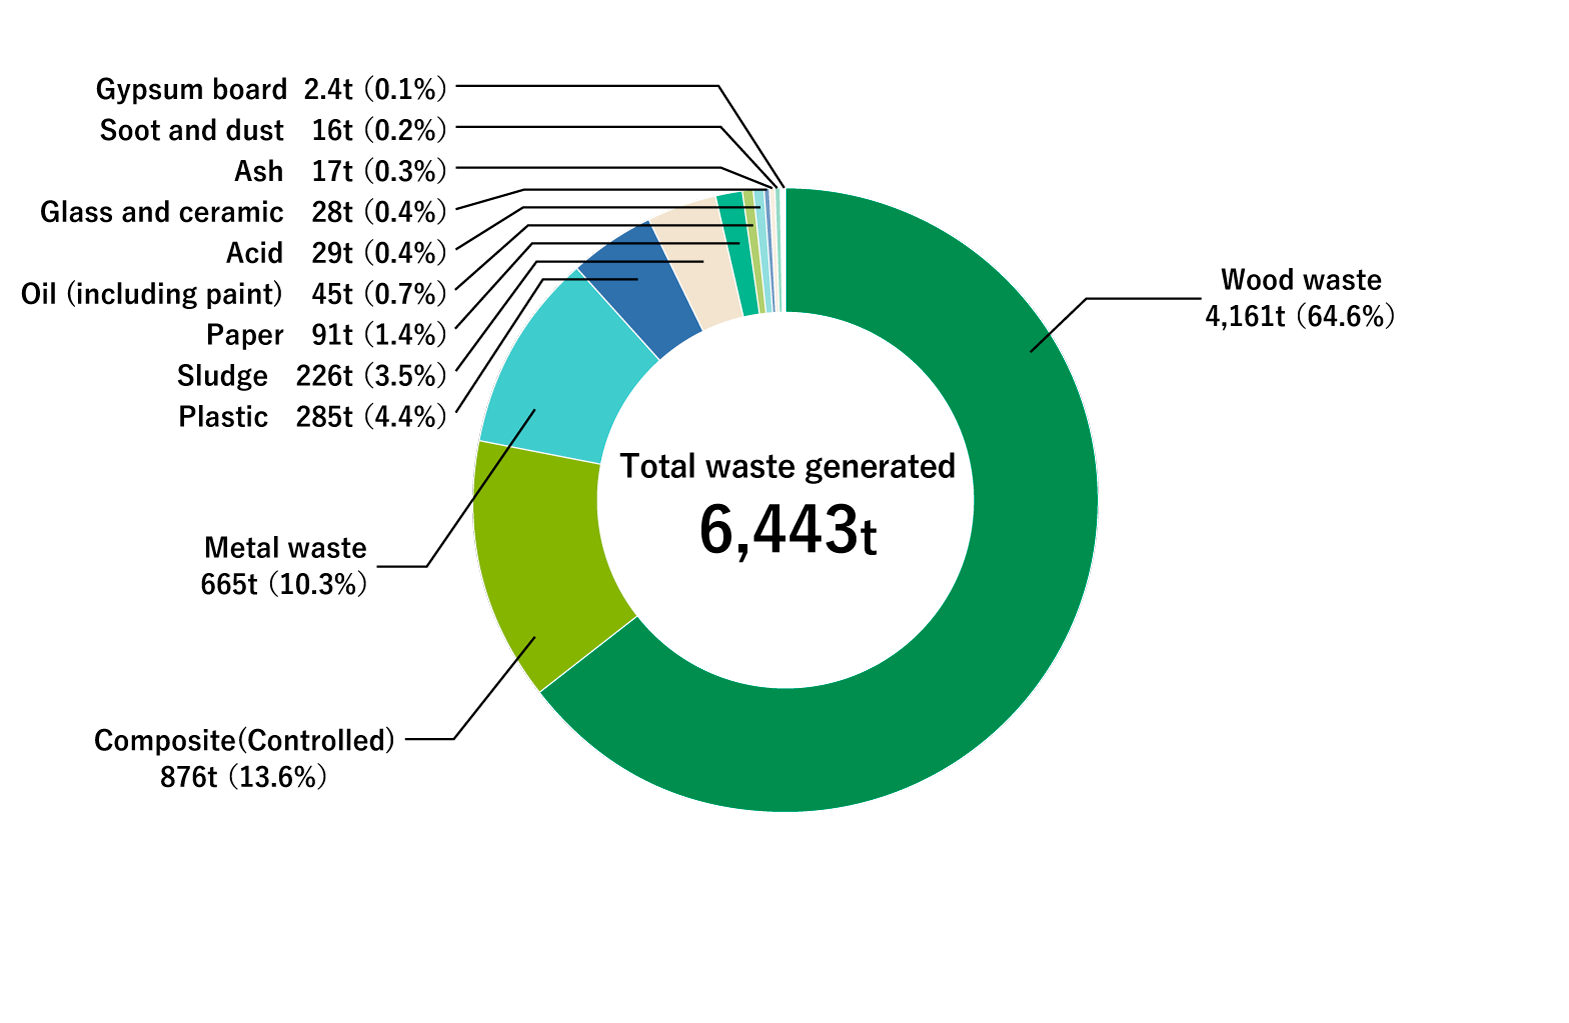 Breakdown of Waste Generated at Domestic Manufacturing Plants (FY2021)